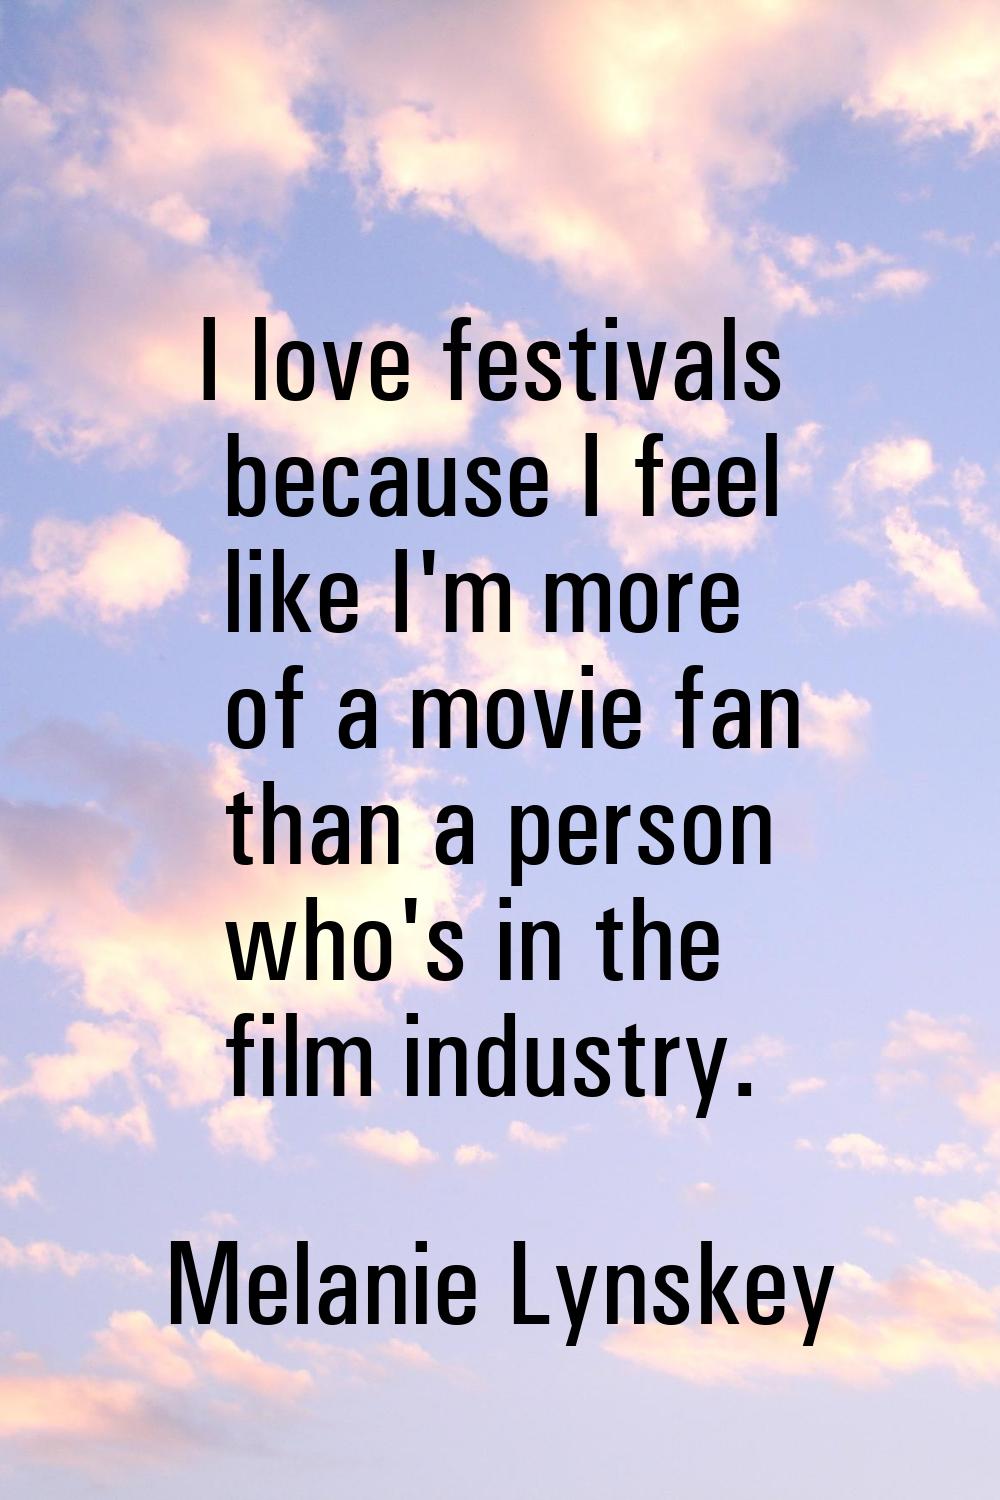 I love festivals because I feel like I'm more of a movie fan than a person who's in the film indust